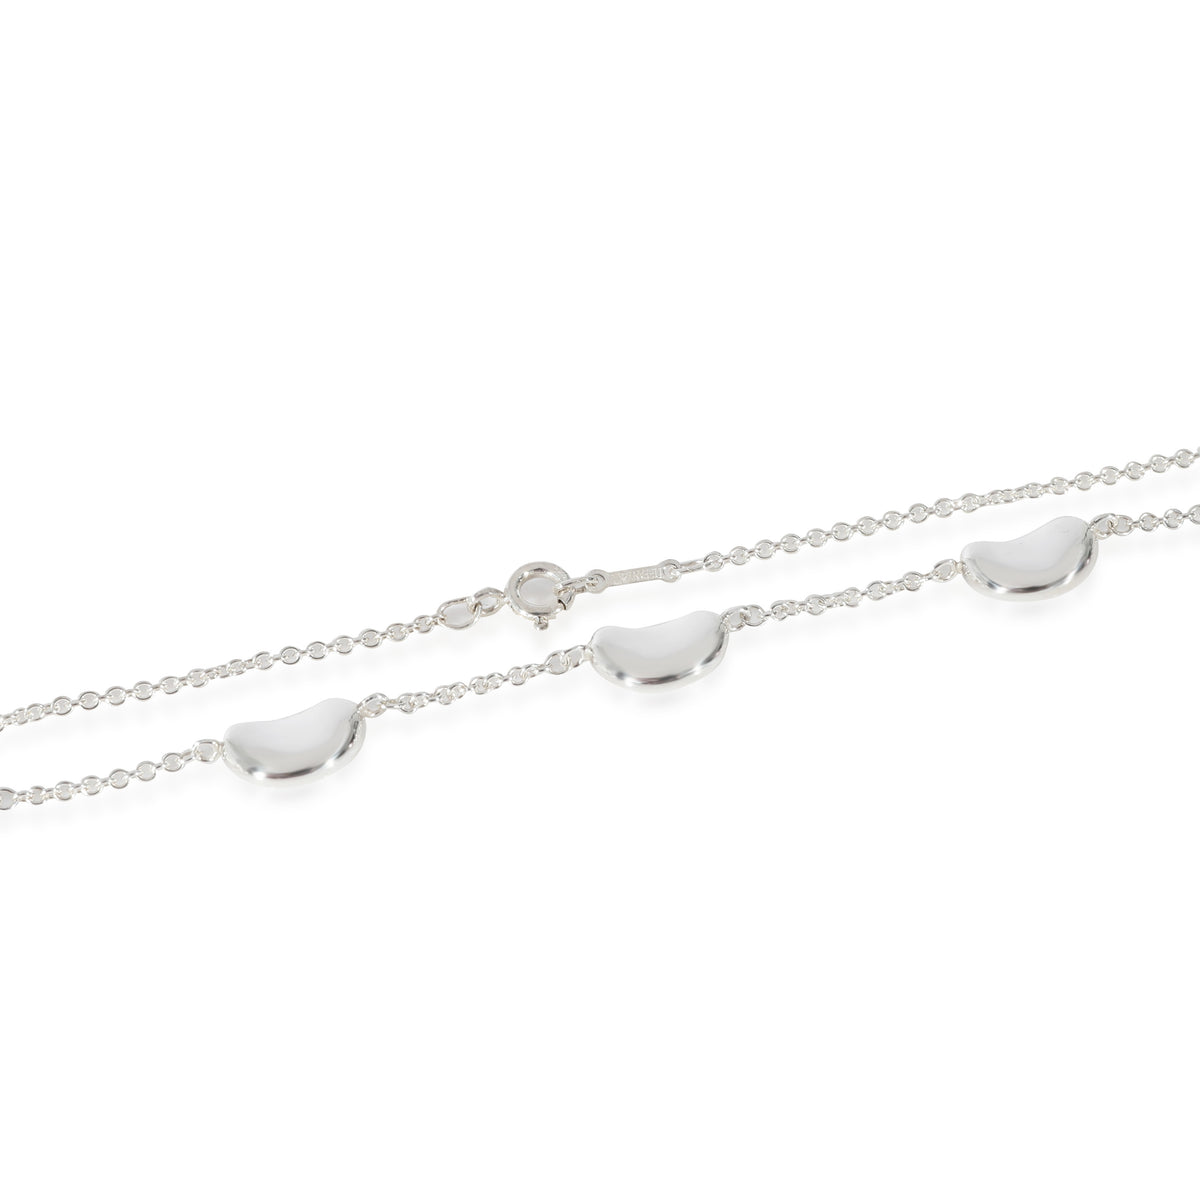 Tiffany & Co. Elsa Peretti Bean 5 Station Necklace in Sterling Silver